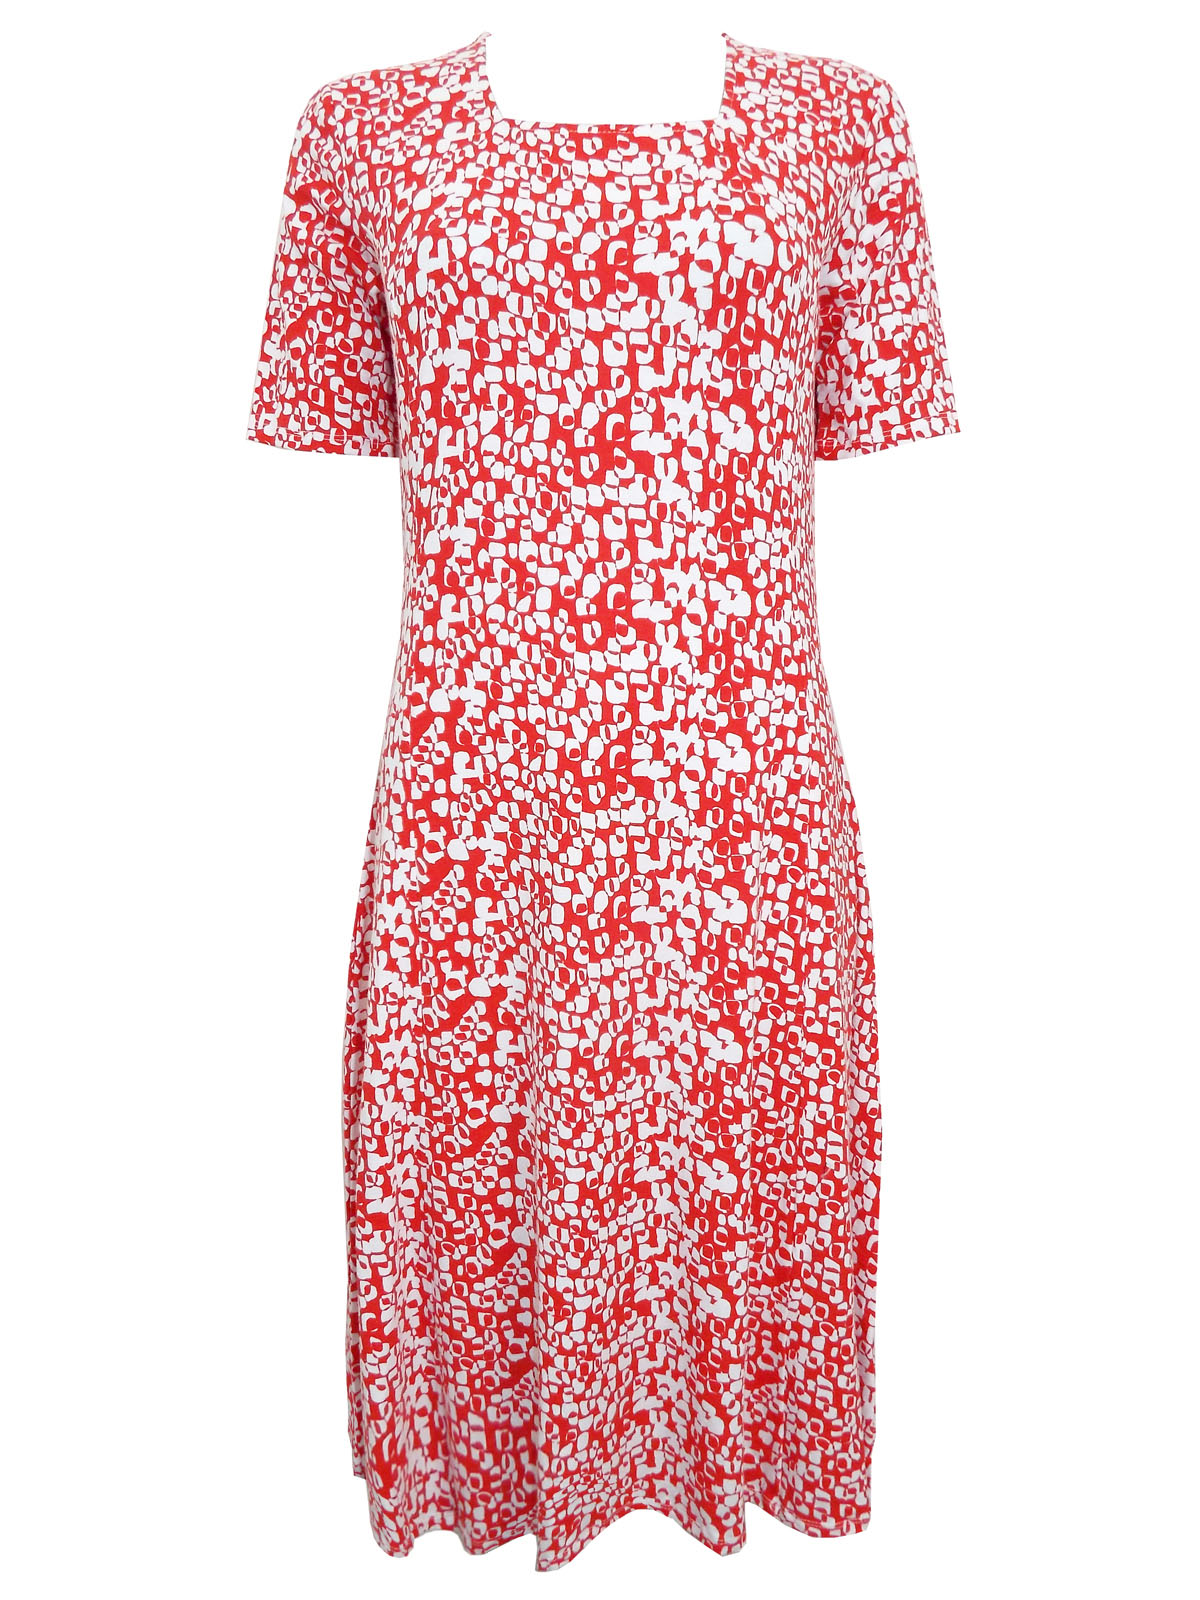 First Avenue RED Block Print Short Sleeve Swing Dress - Size 12 to 20